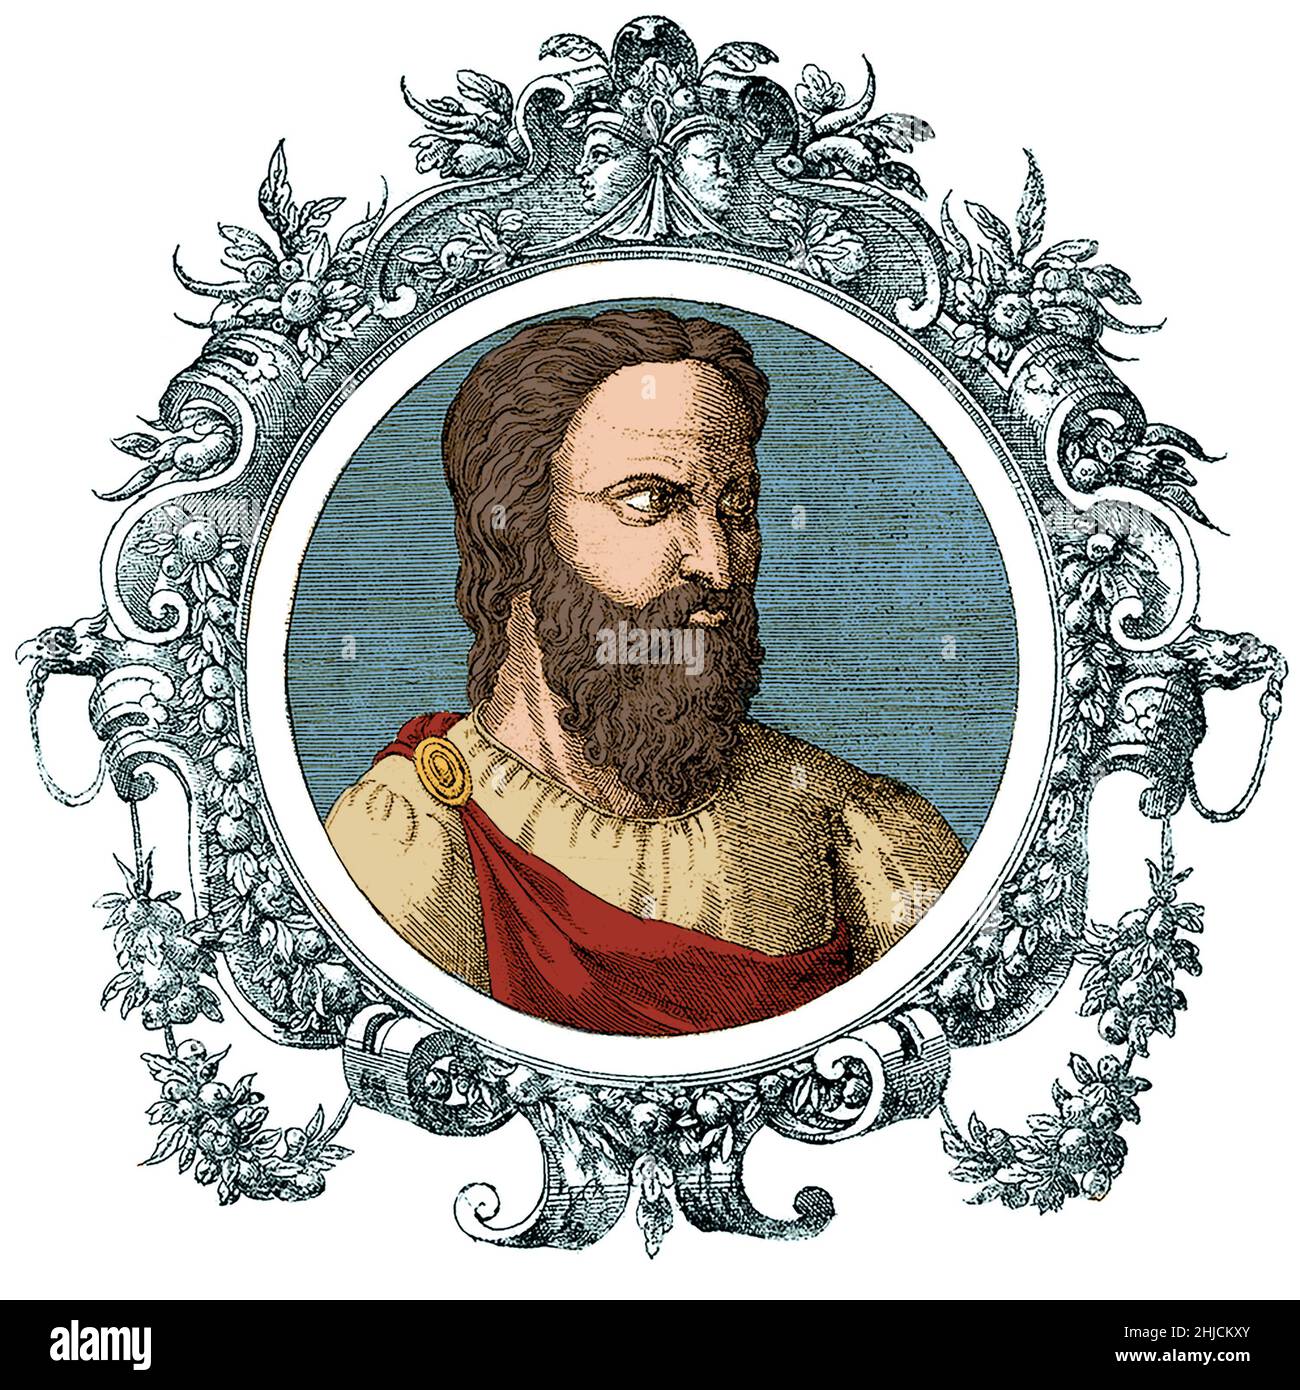 Aretaeus was a celebrated Greek physician who probably lived in Cappadocia in the second half of the second century AD, part of the Roman Empire. His eight treatises on diseases are among the most important Greco-Roman medical works. He wrote the first known descriptions of celiac disease and diabetes, and refined definitions of many other diseases. Colorized. Stock Photo